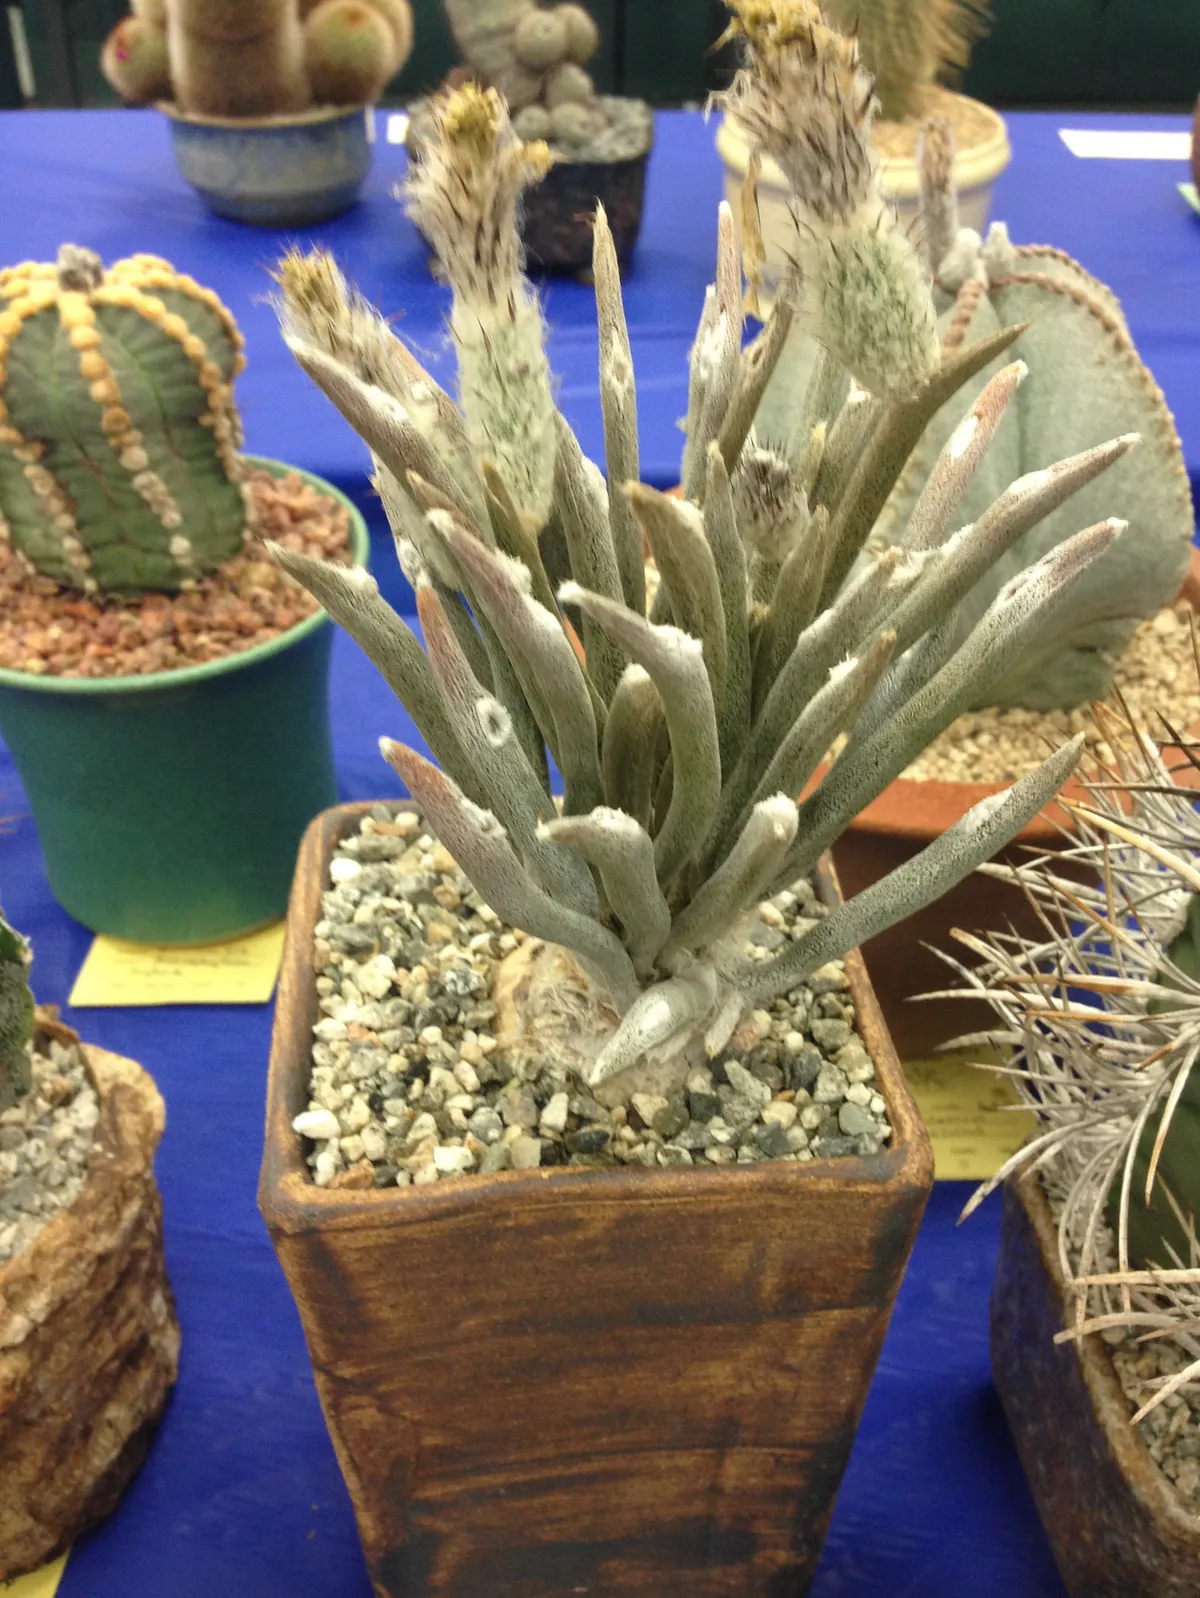 Astrophytum caput-medusae on sale at an American cats show. This is a newly described species, known from only one location in Mexico and listed as Critically Endangered on the IUCN Red List. Its primary threat in the wild is from illegal collection. © Flickr user Reggi1, CC BY-NC 2.0